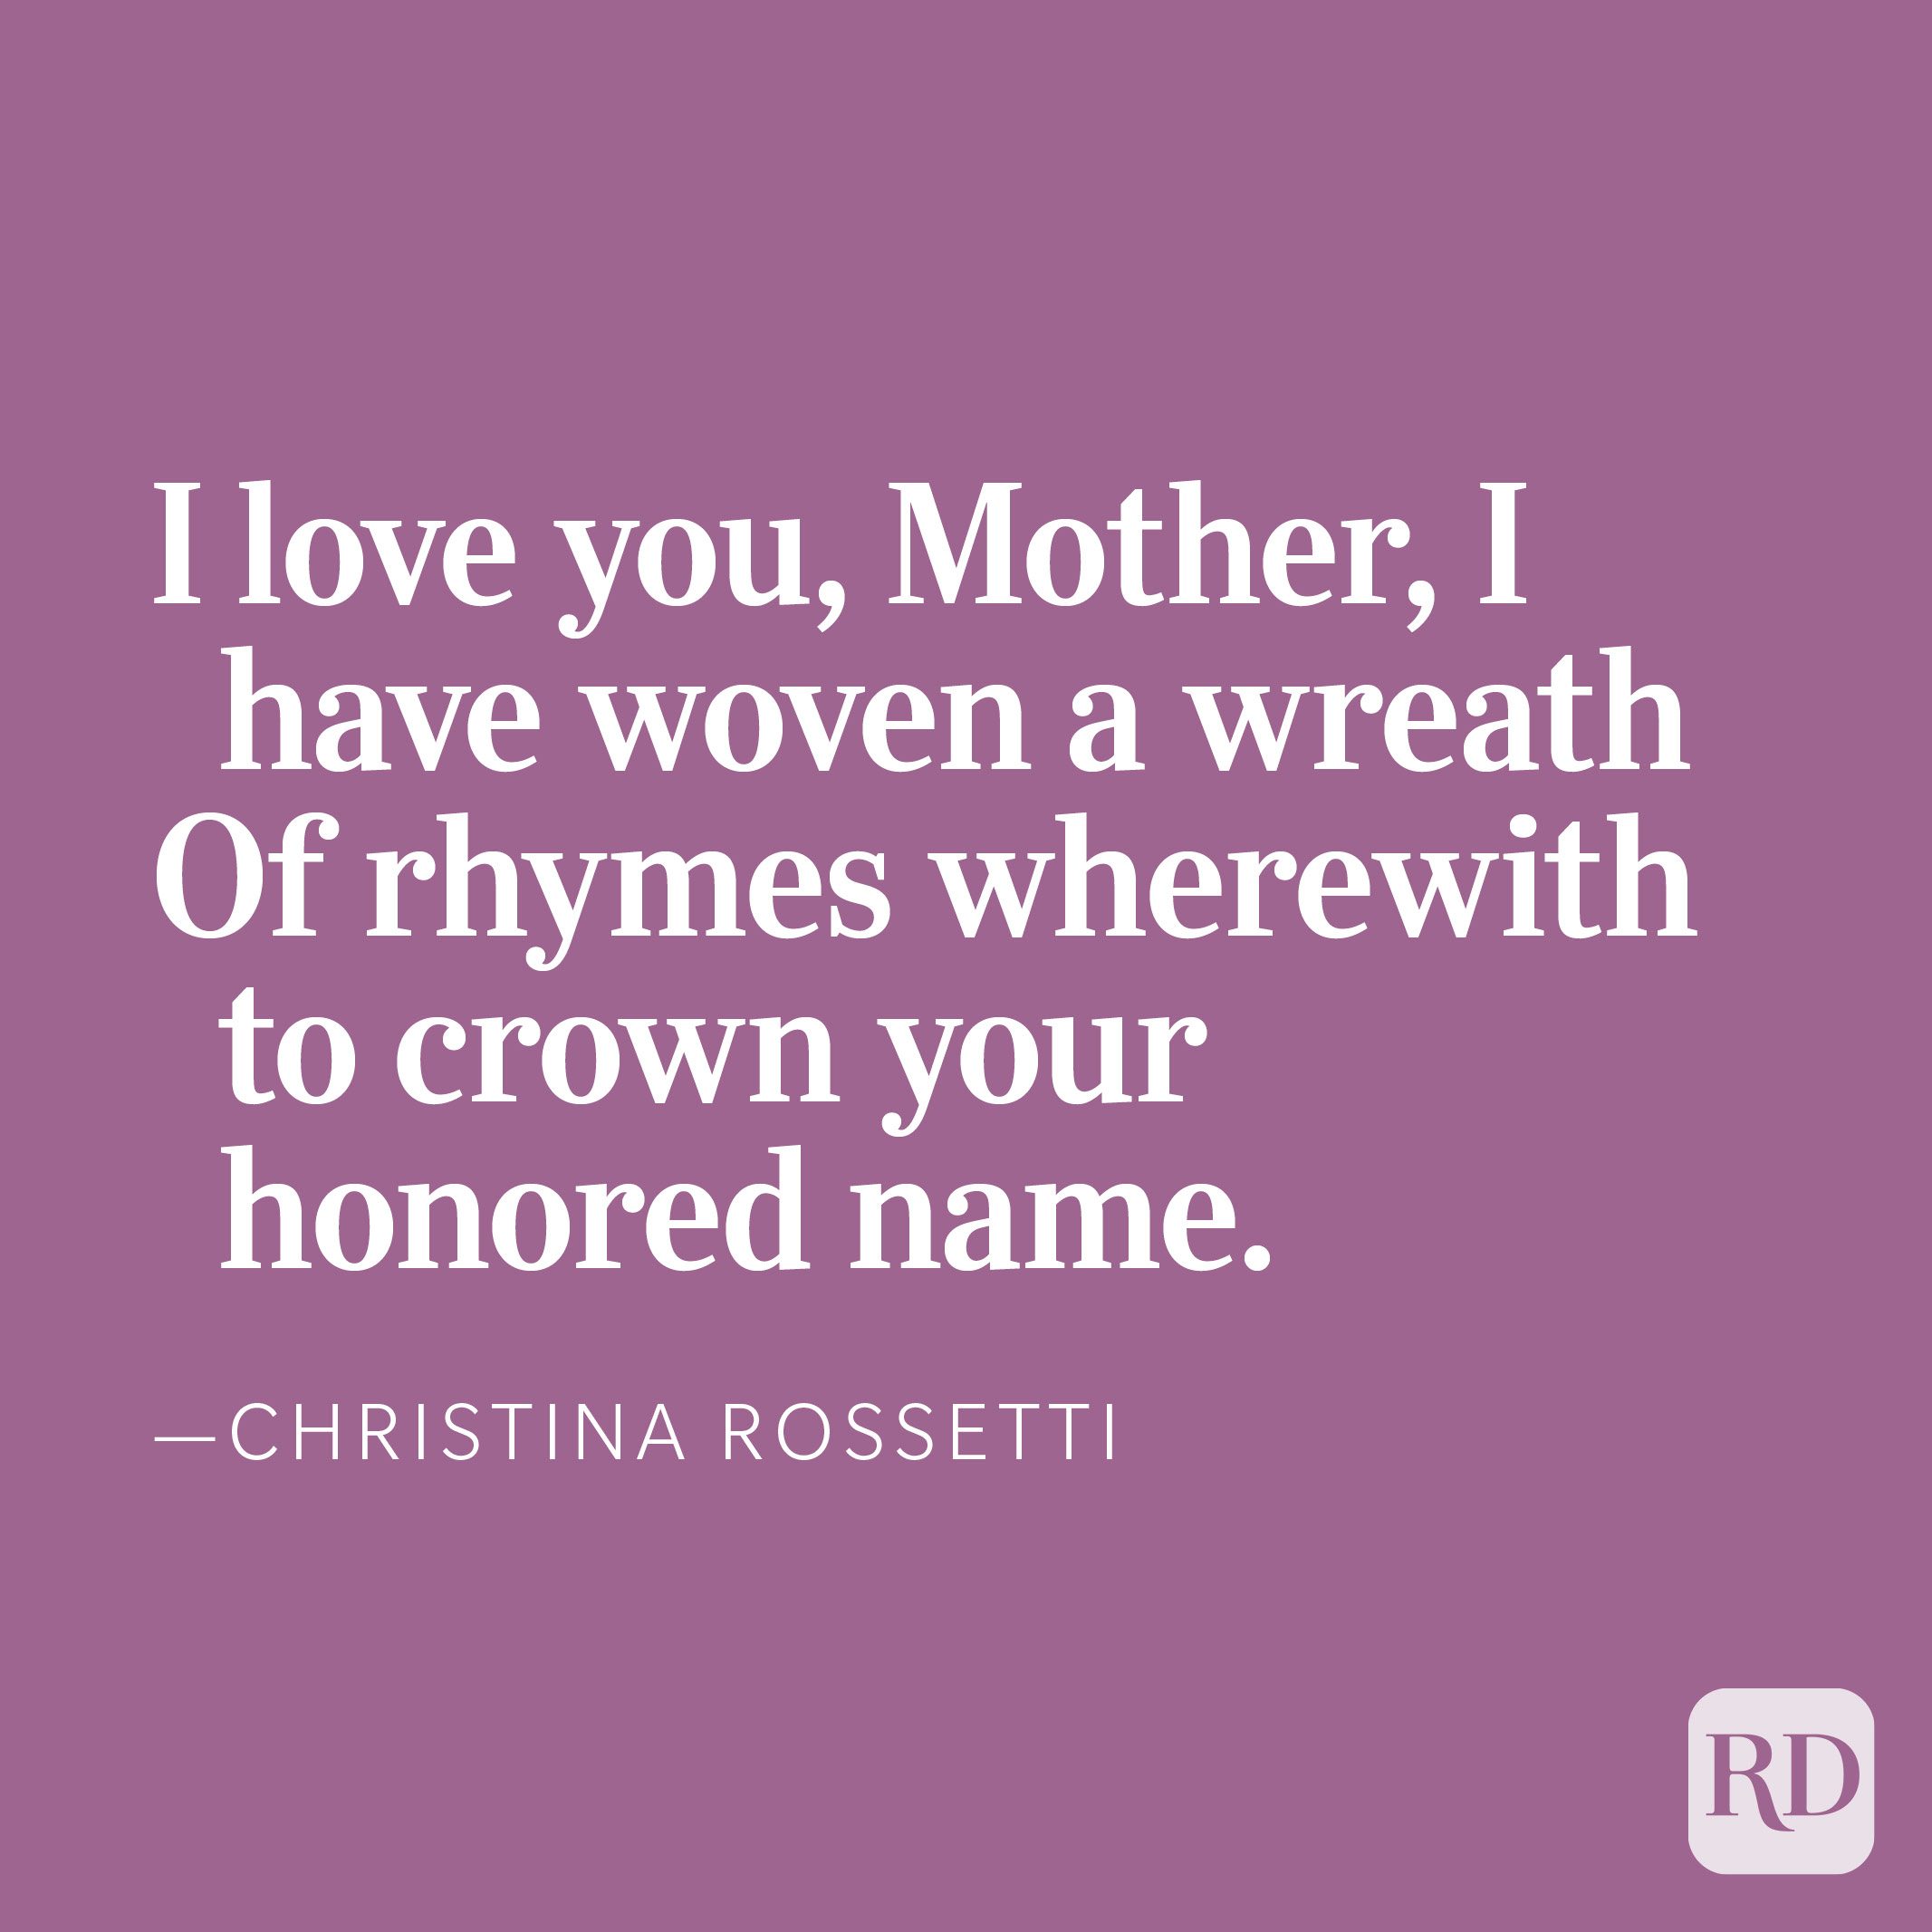 25 Mother's Day Poems That Will Touch Her Heart